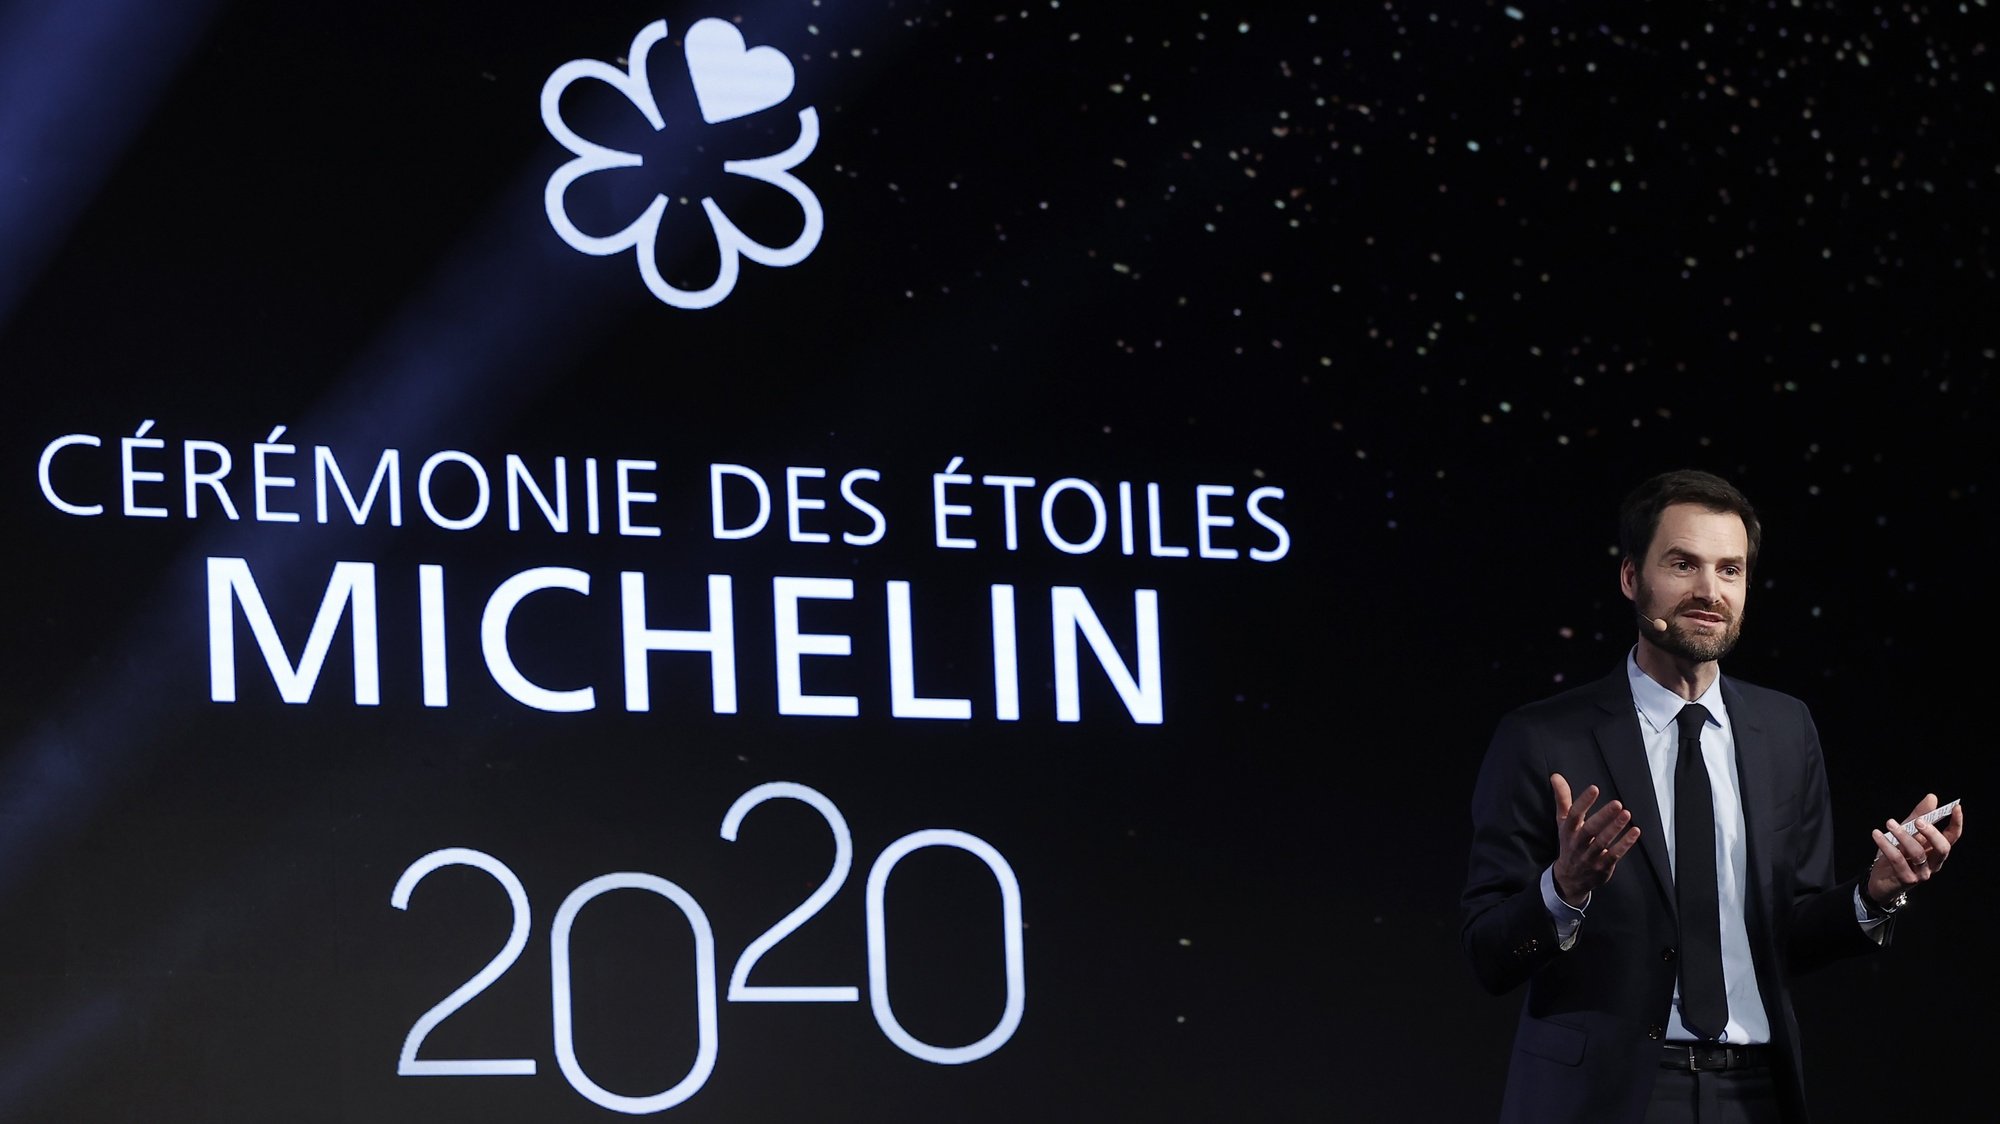 epa08170301 International Director of the Michelin guide, Gwendal Poullennec, delivers a statement at the 2020 Michelin star ceremony in Paris, France, 27 January 2020. The ceremony announces the 628 restaurants which will boast one, two or three coveted Michelin stars.  EPA/IAN LANGSDON